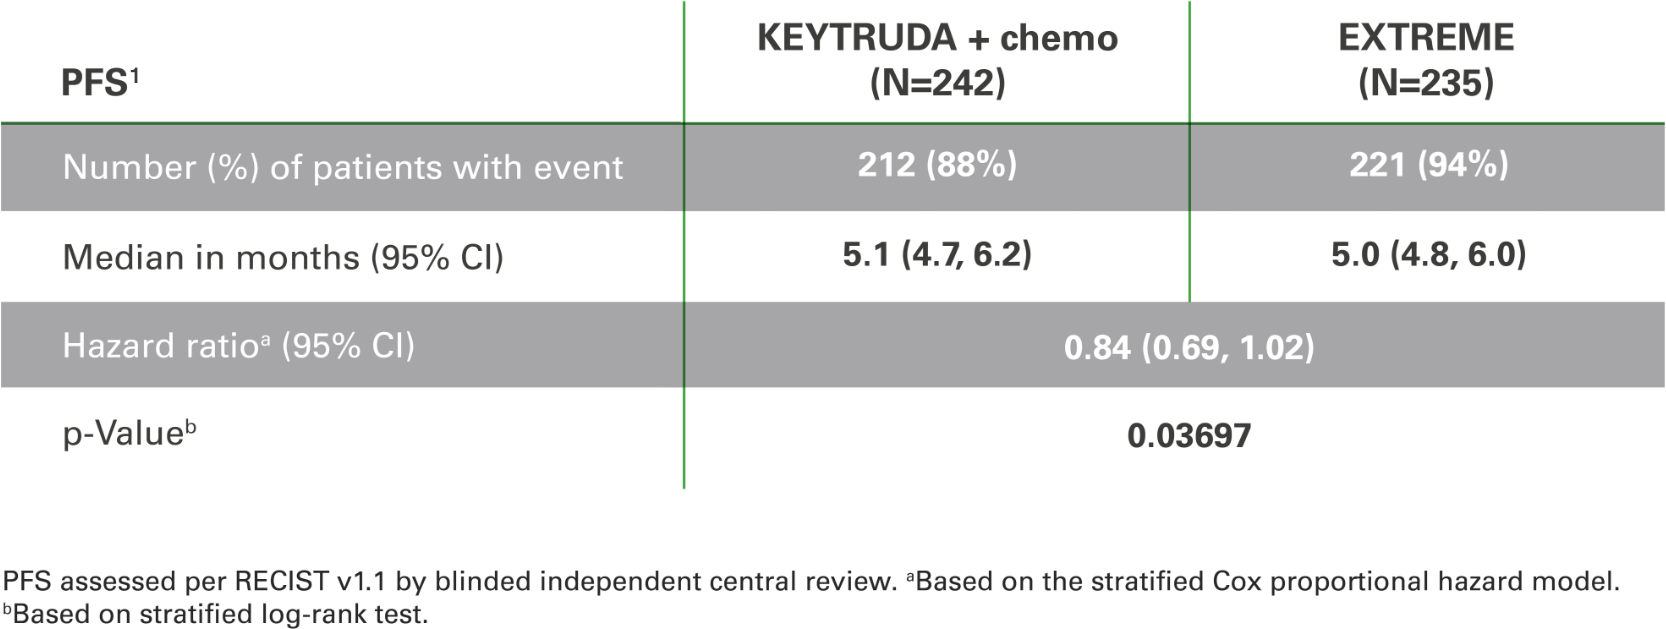 Table of progression-free survival in for HNSCC patients in KEYNOTE 048, KEYTRUDA (pembrolizumab) plus chemotherapy vs EXTREME